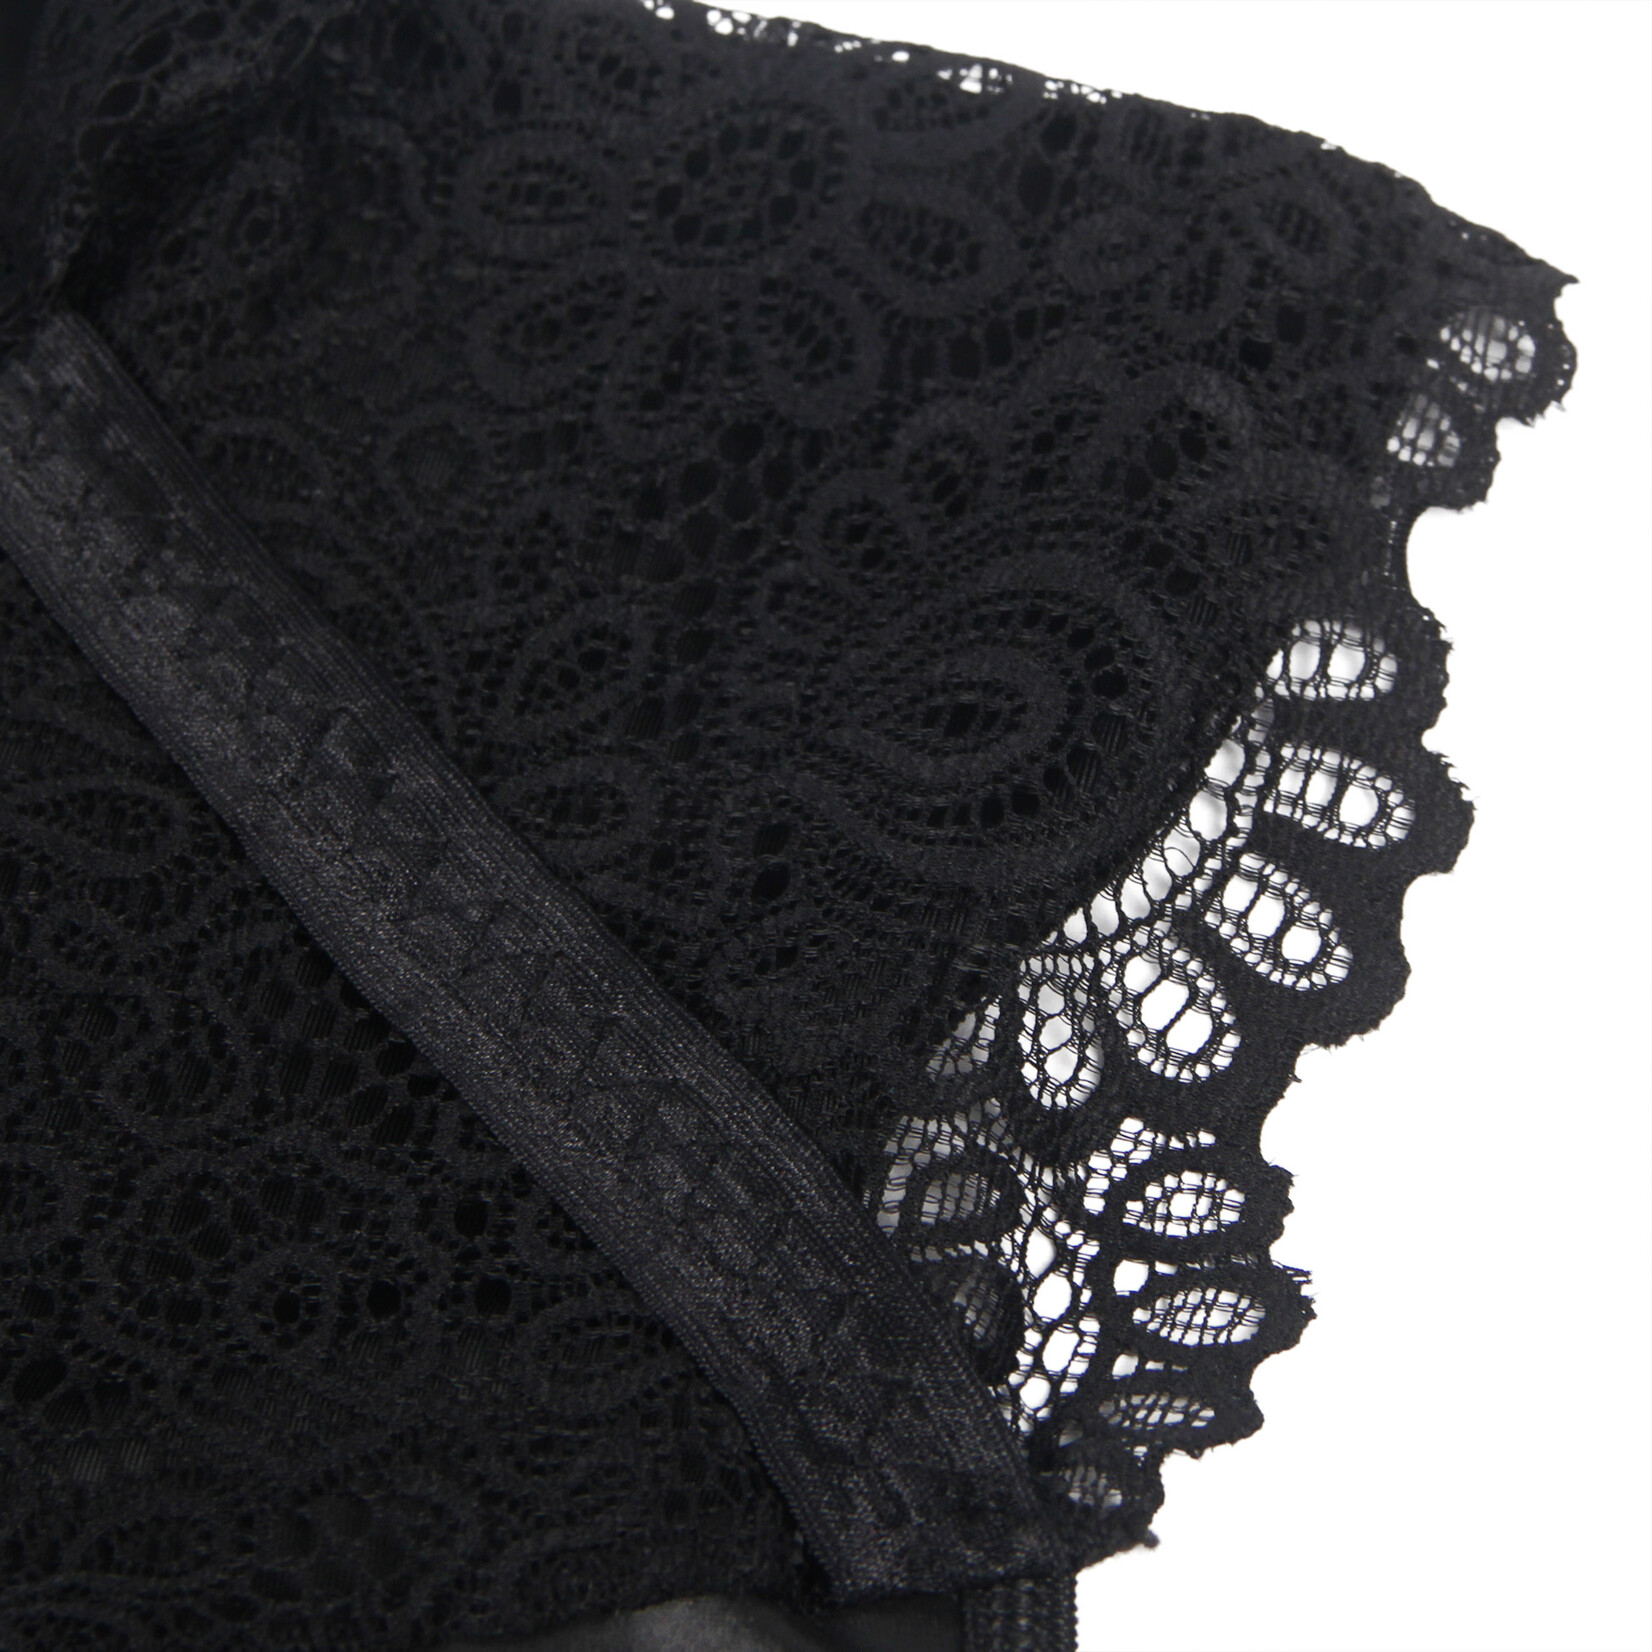 OH YEAH! -  SEXY BLACK LACE LEATHER LINGERIE XS-S